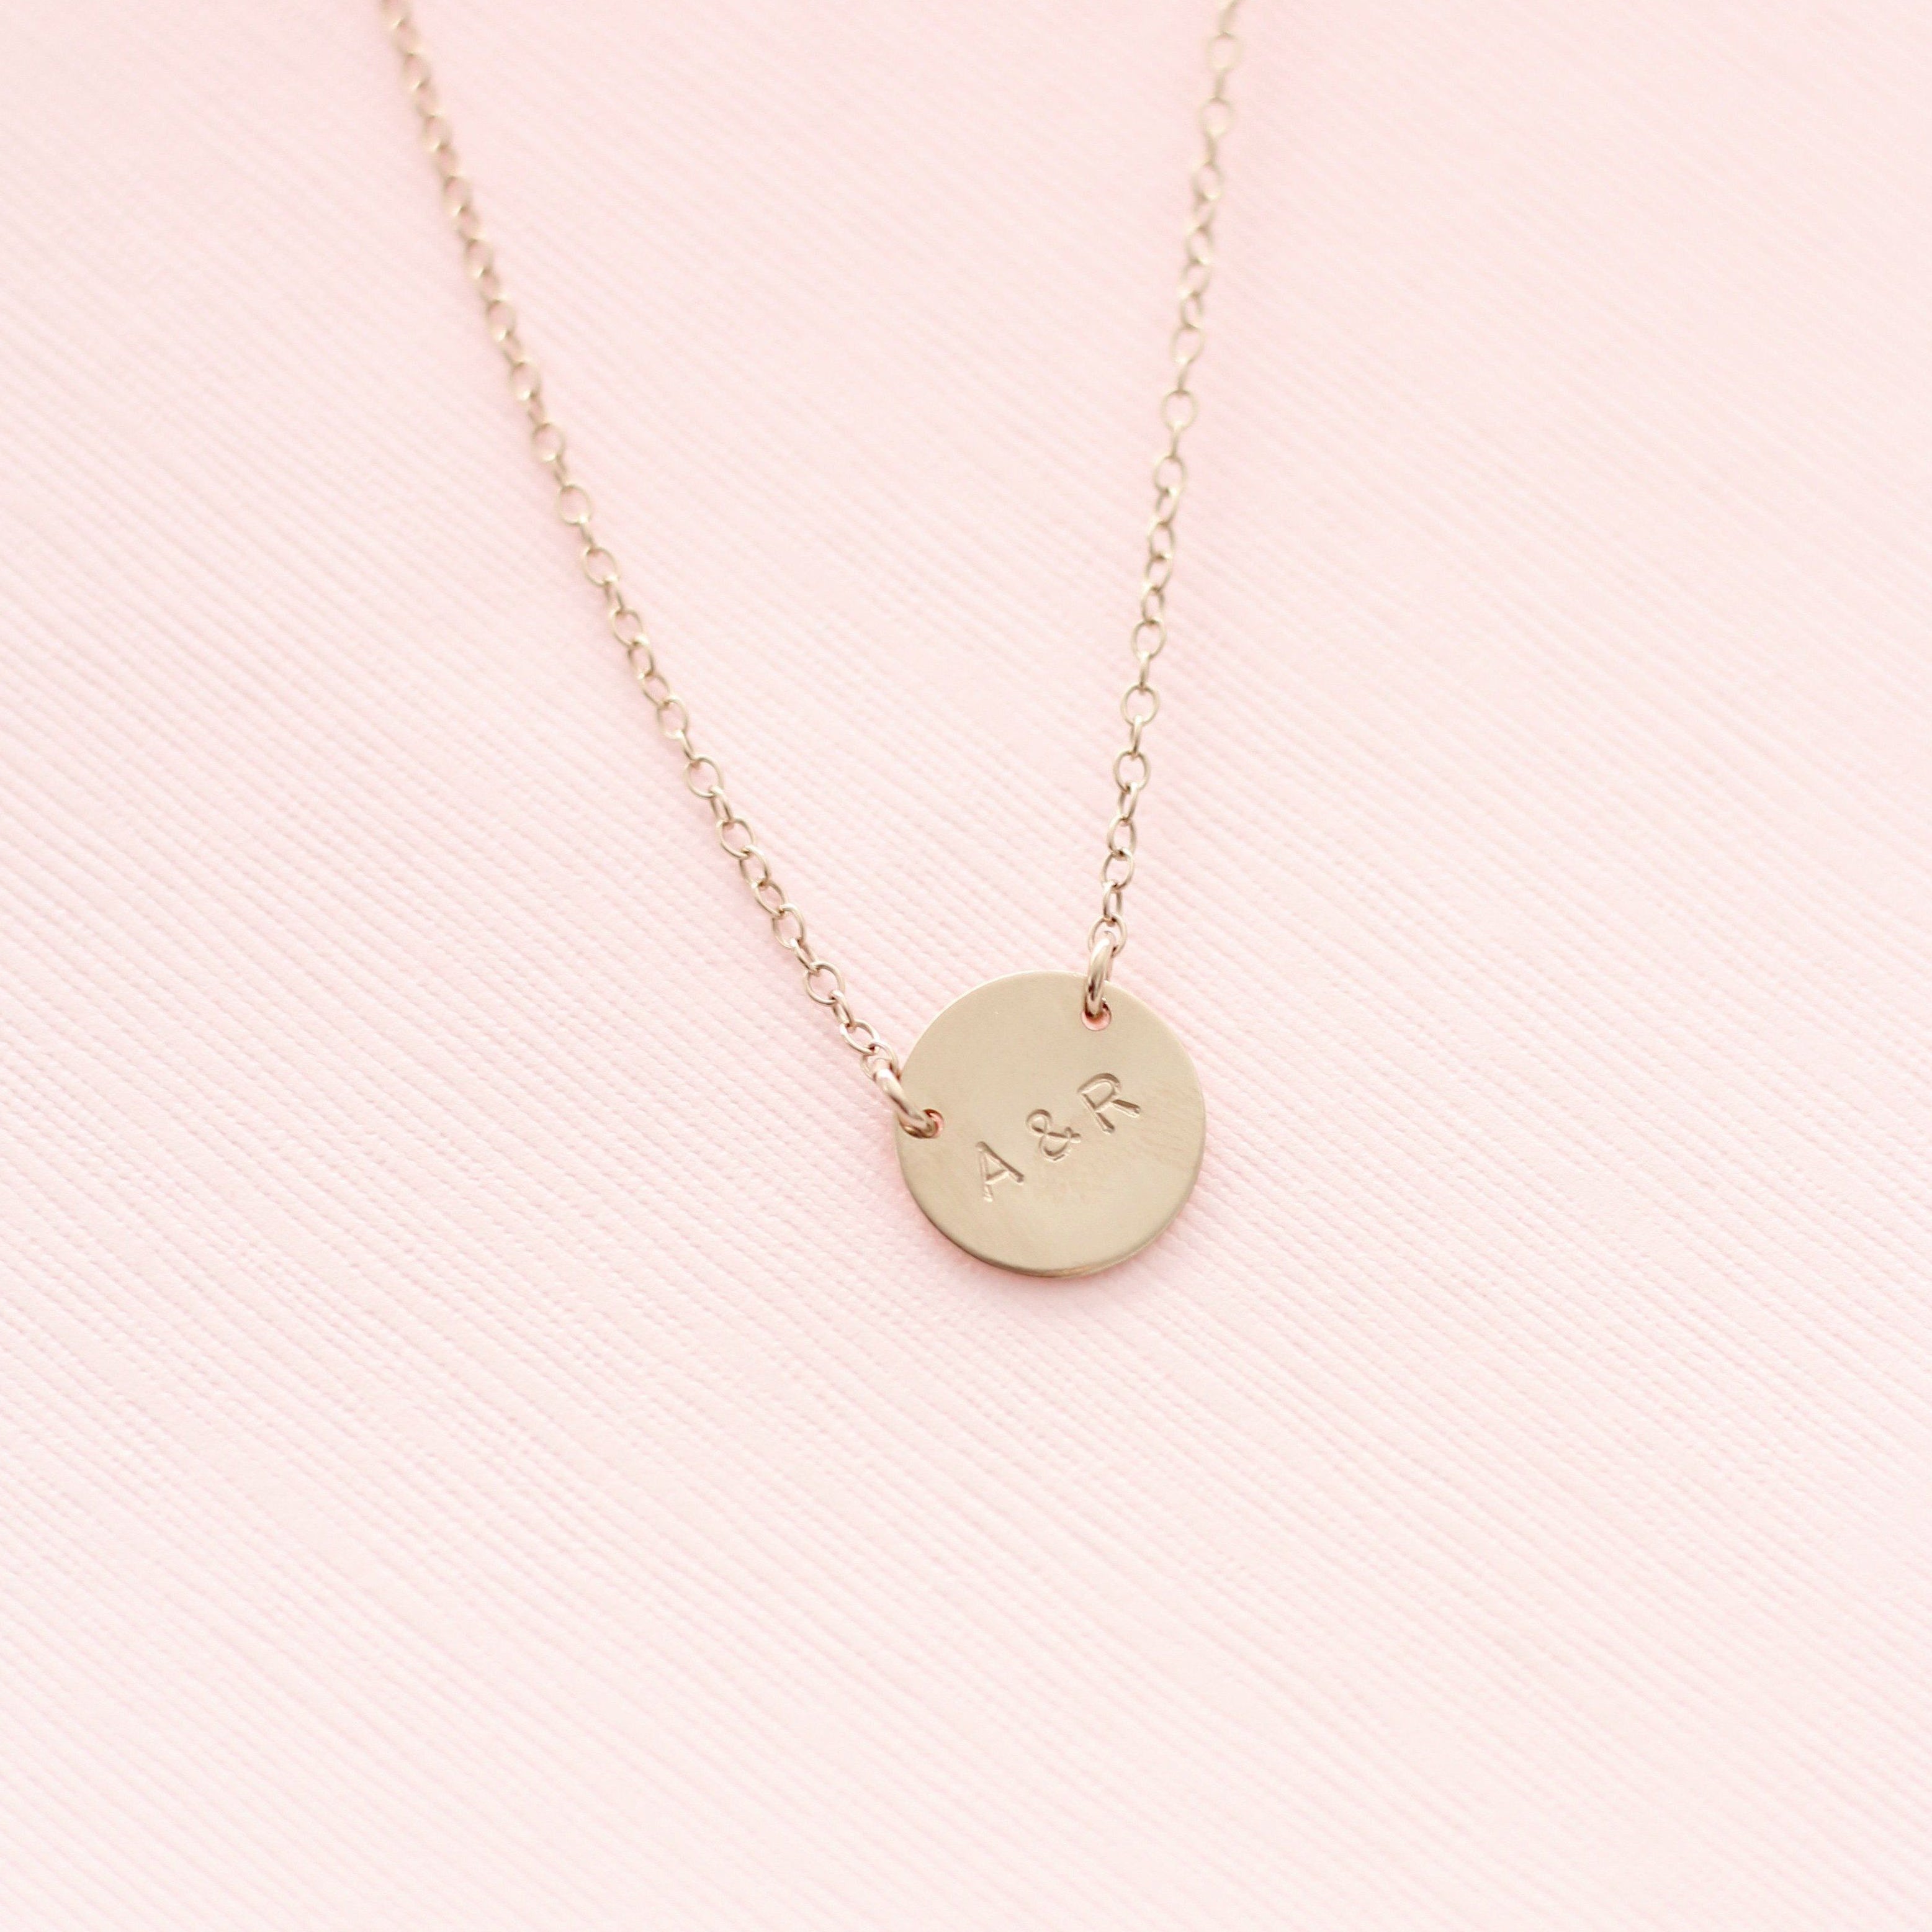 Custom handmade initial coin necklace made in Canada